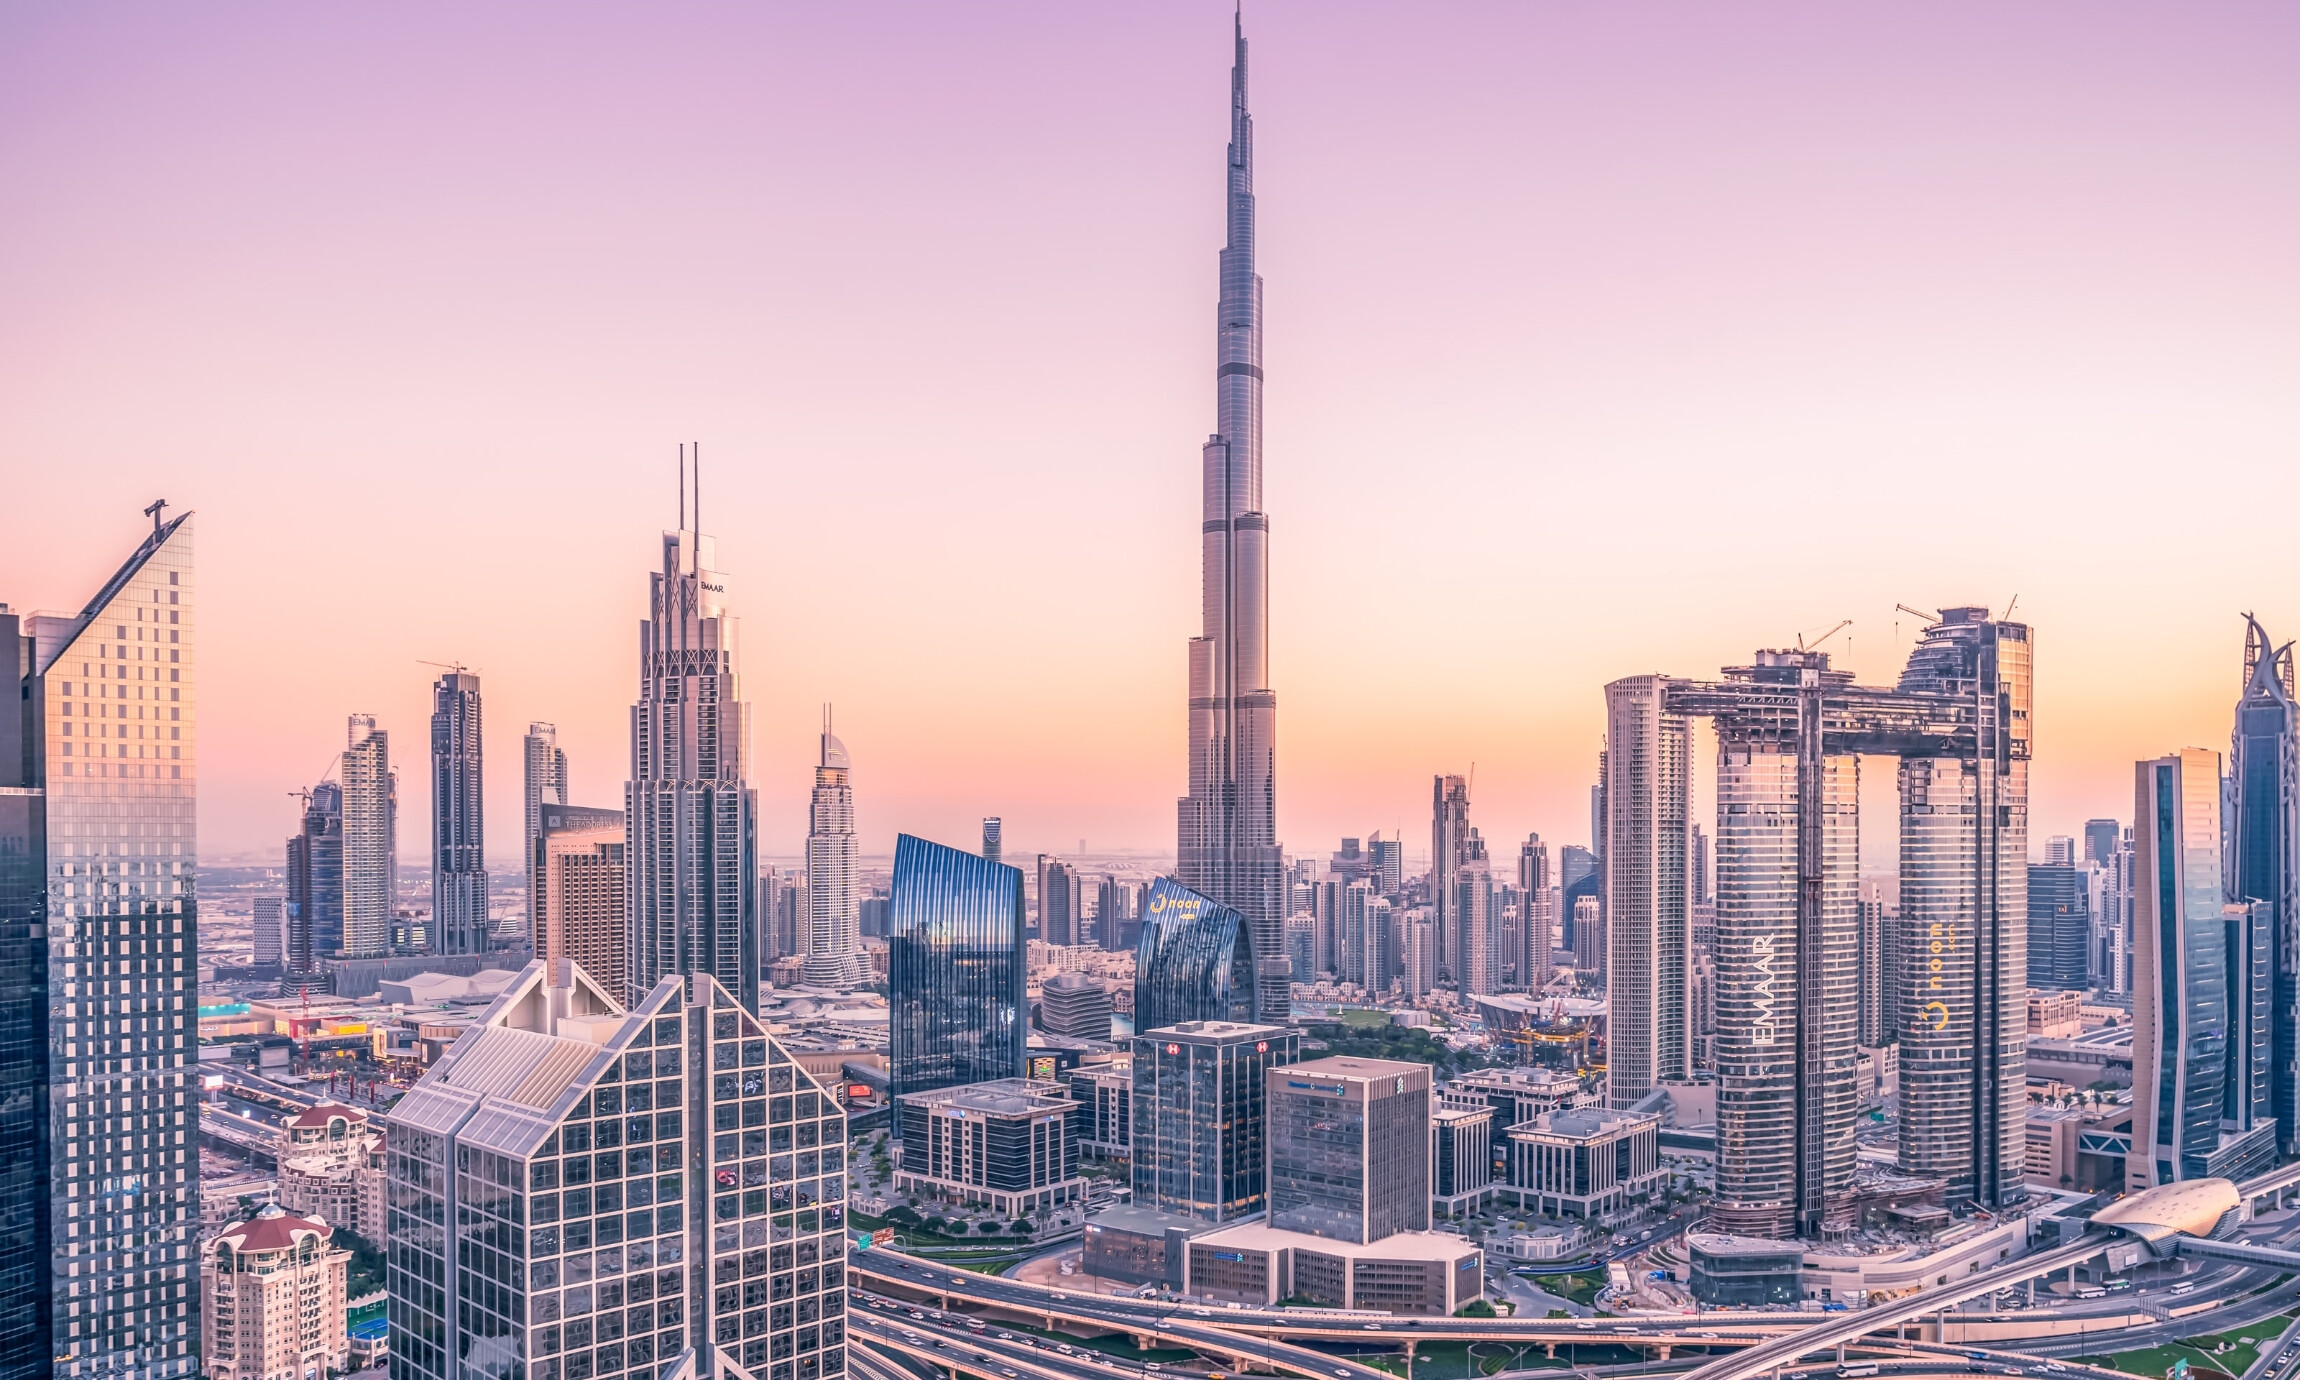 commercetools expands to the Middle East